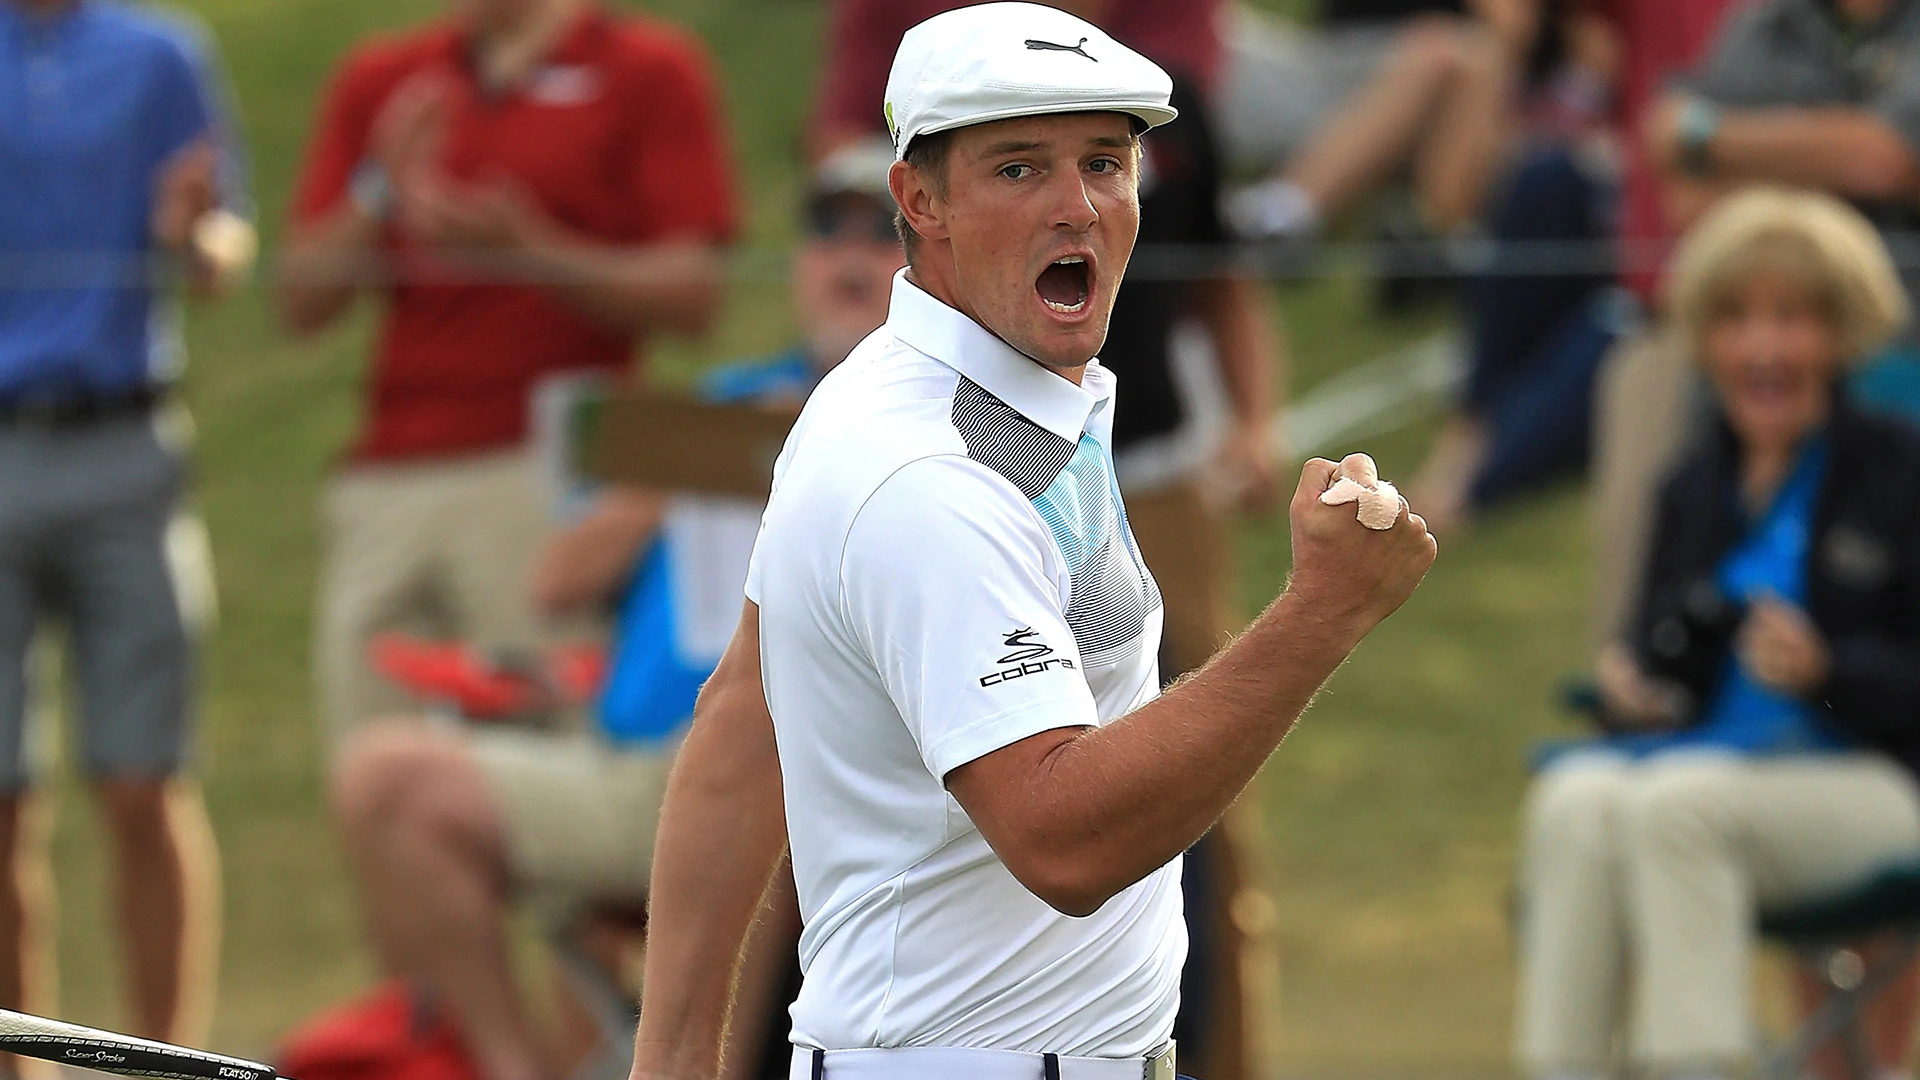 Watch: DeChambeau drains eagle putt, lets fly with fist pump